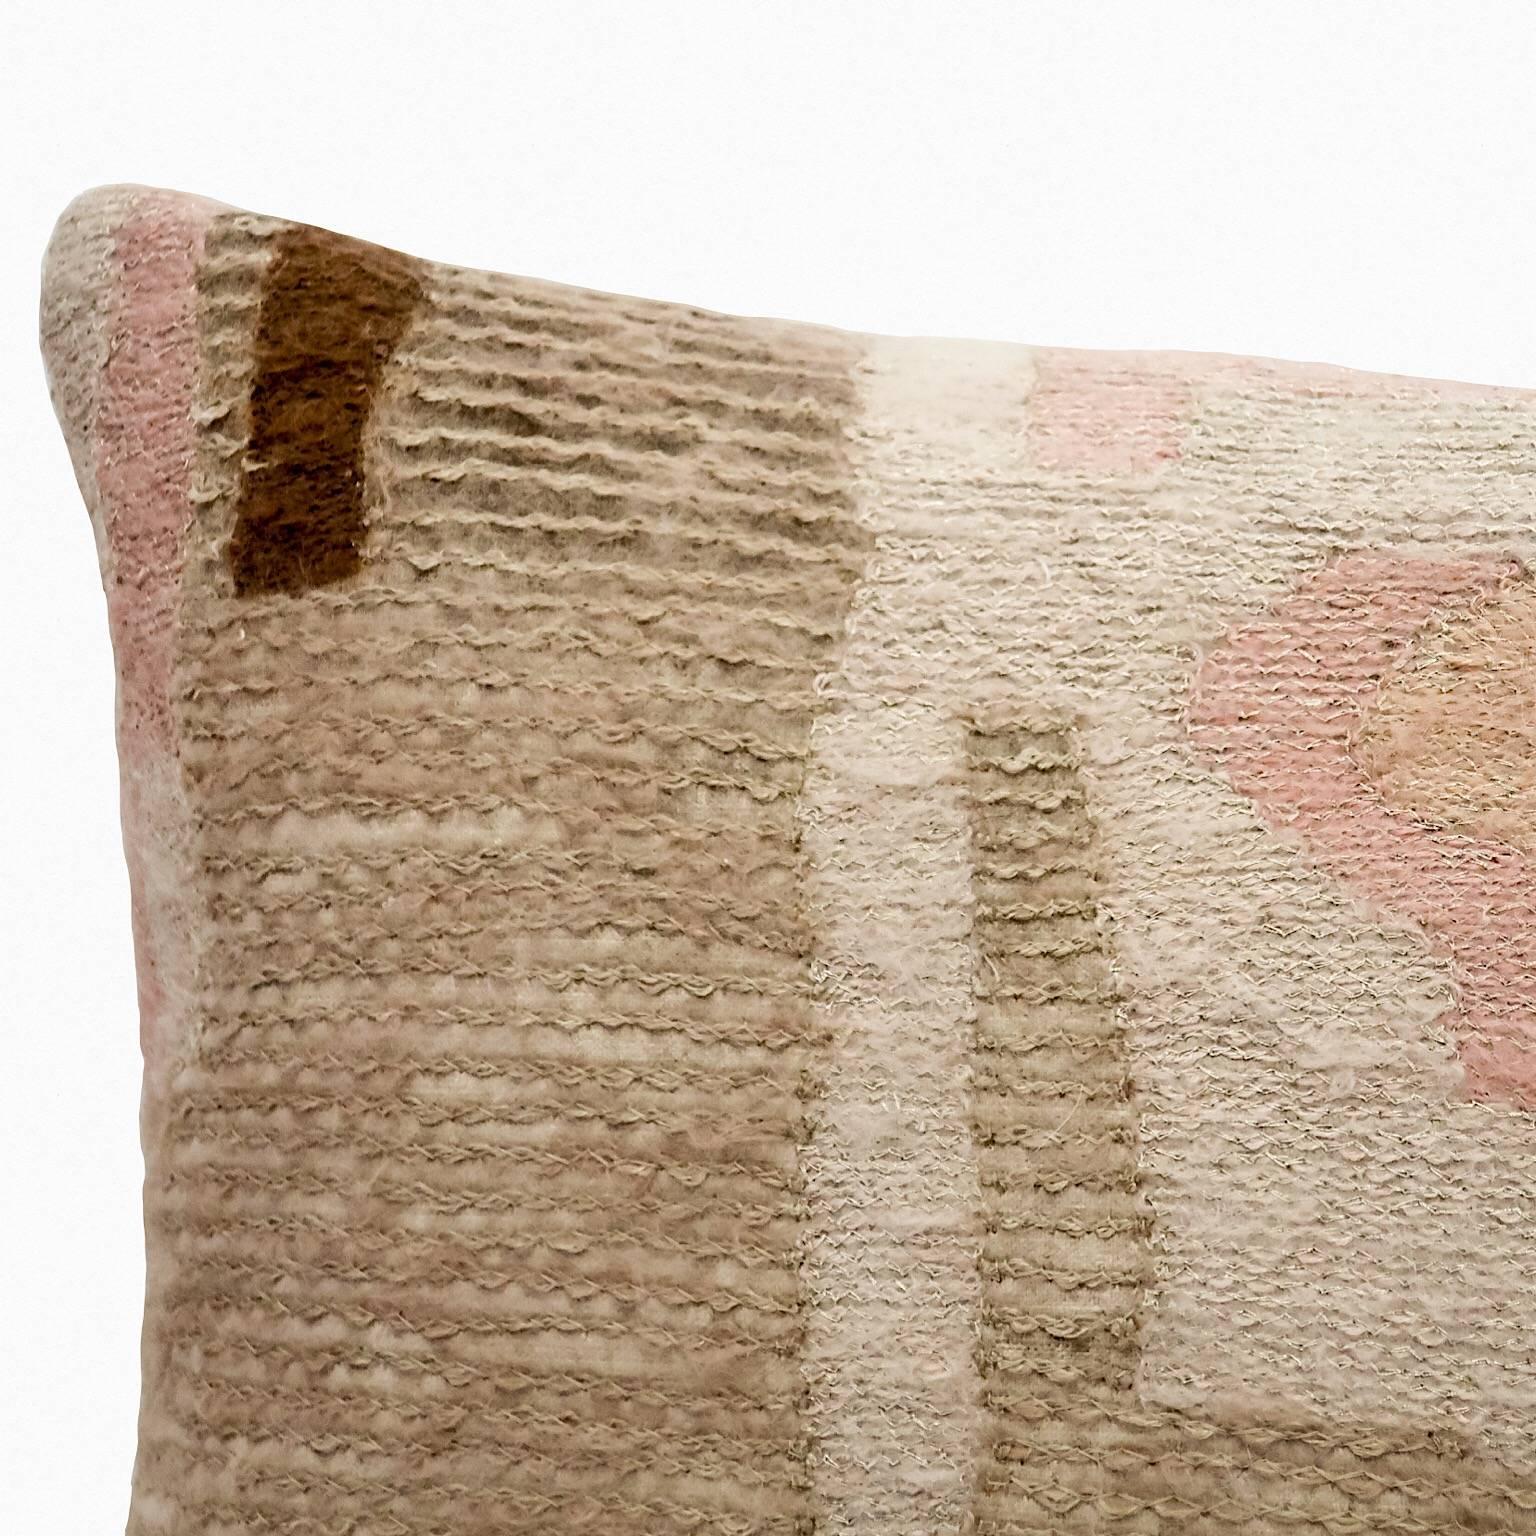 Handcrafted pillow embroidered in dusty pink mohair wool yarn on dusty pink satin.
Abstract design with rose, blush, beige and cocoa colour details.
Highlight of pale gold metallic yarn
Also available in petrol blue.